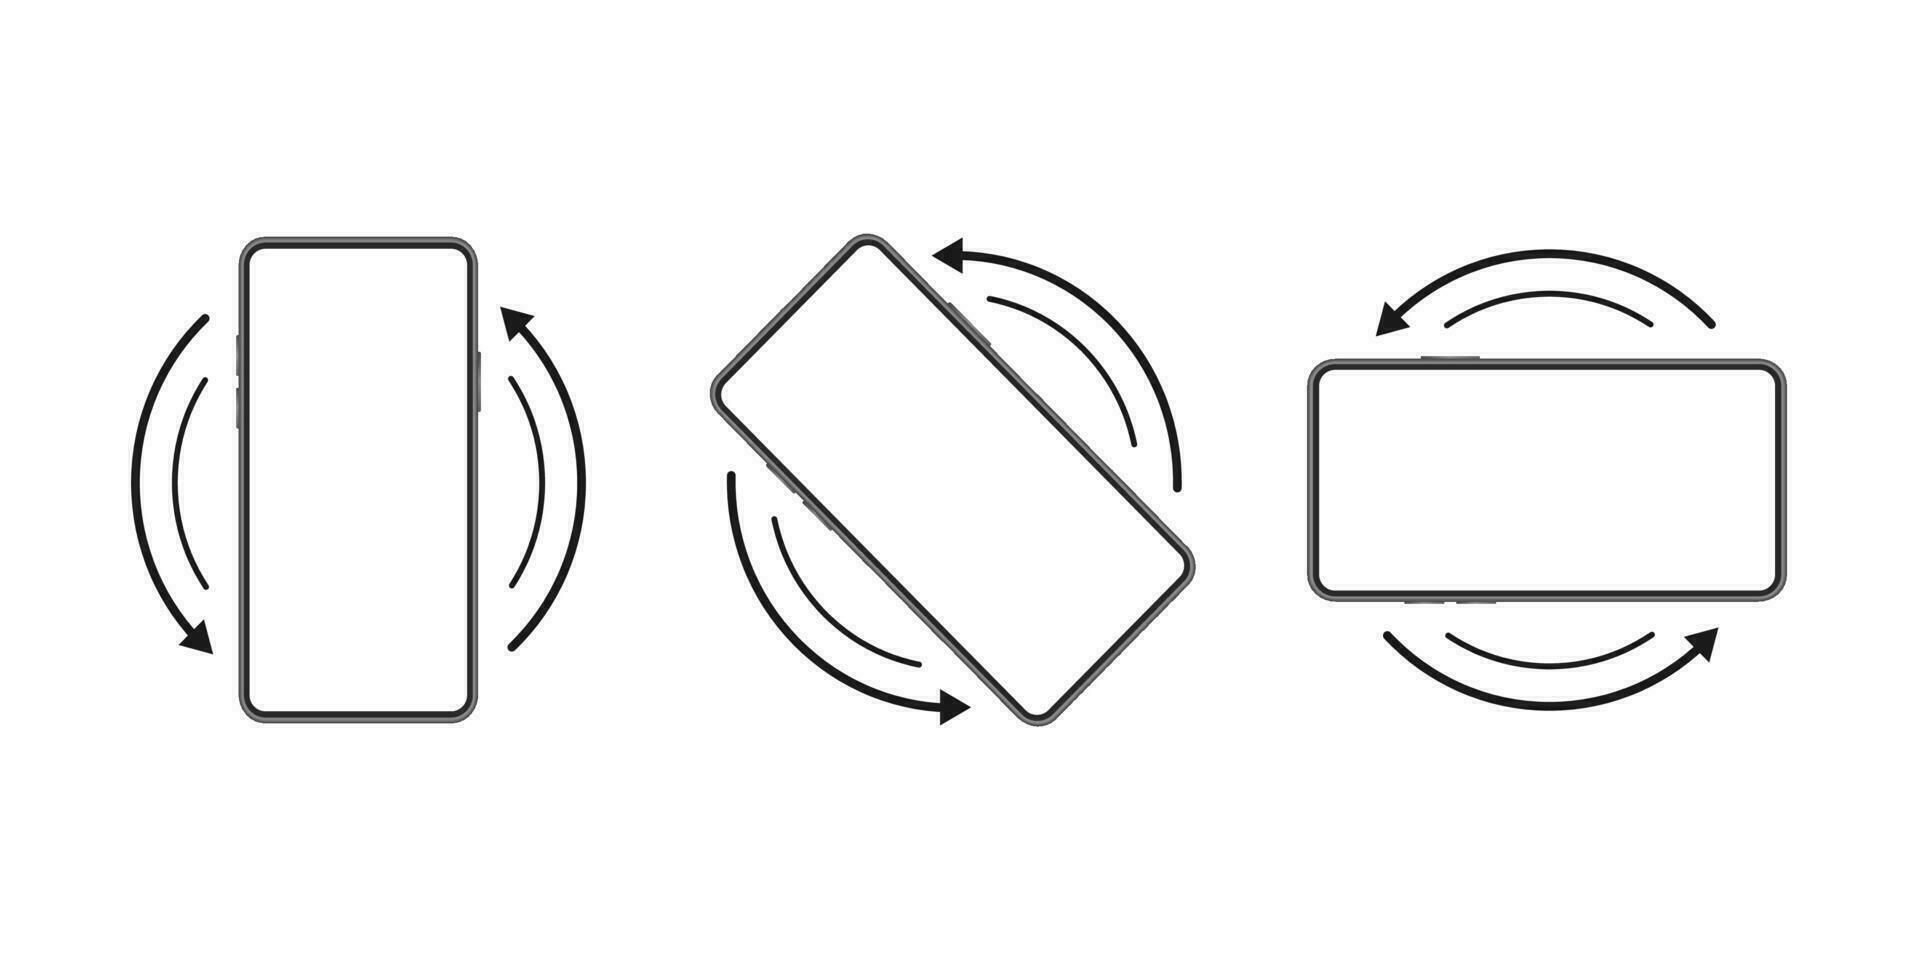 Rotate smartphone. Phone screen vertical or horizontal turn. Device rotation icon. vector